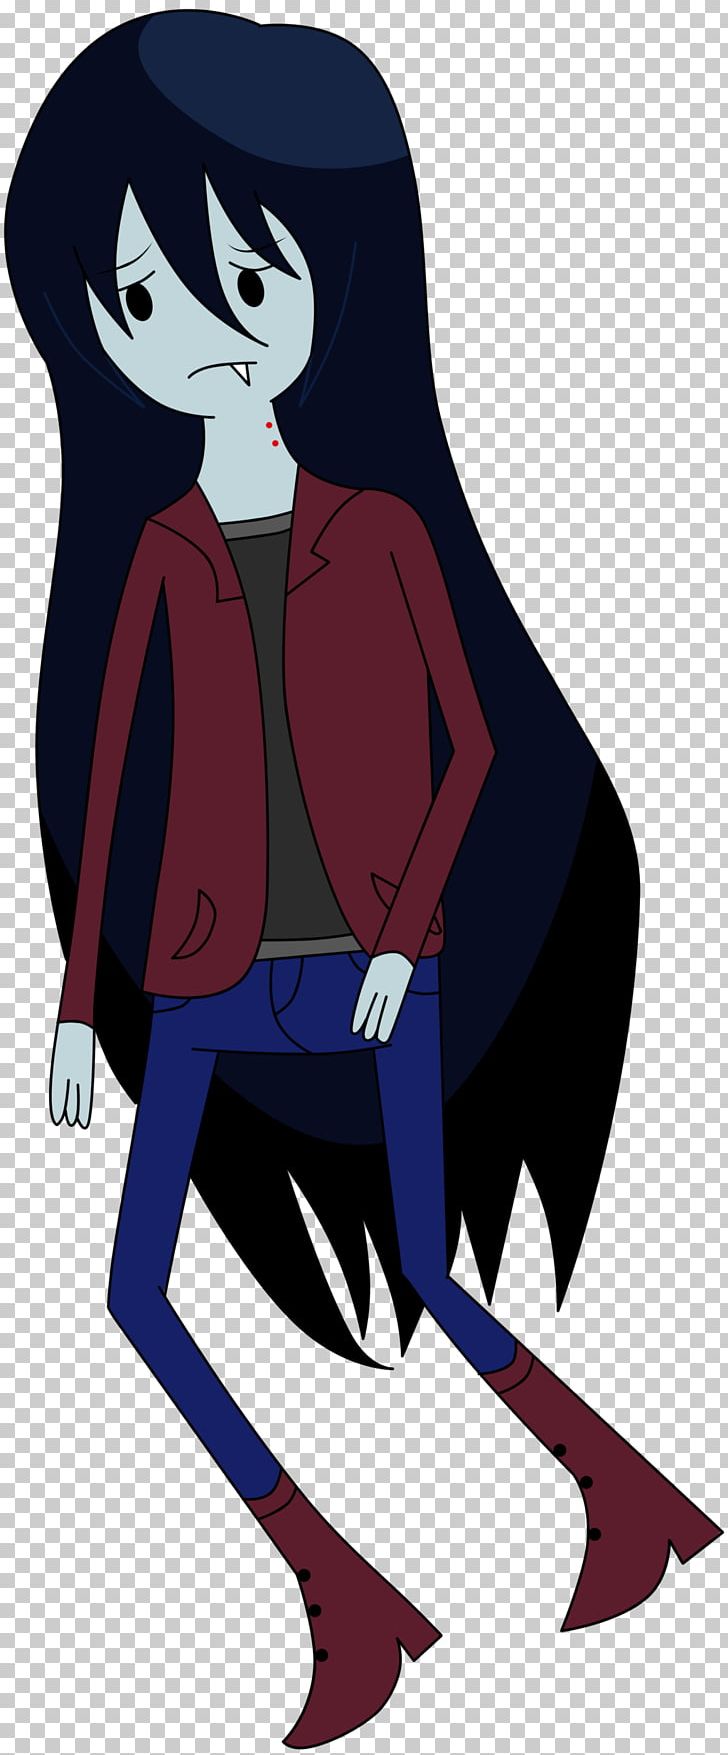 Marceline The Vampire Queen Ice King Finn The Human PNG, Clipart, Adventure, Adventure Time, Adventure Time Marceline, Art, Black Hair Free PNG Download